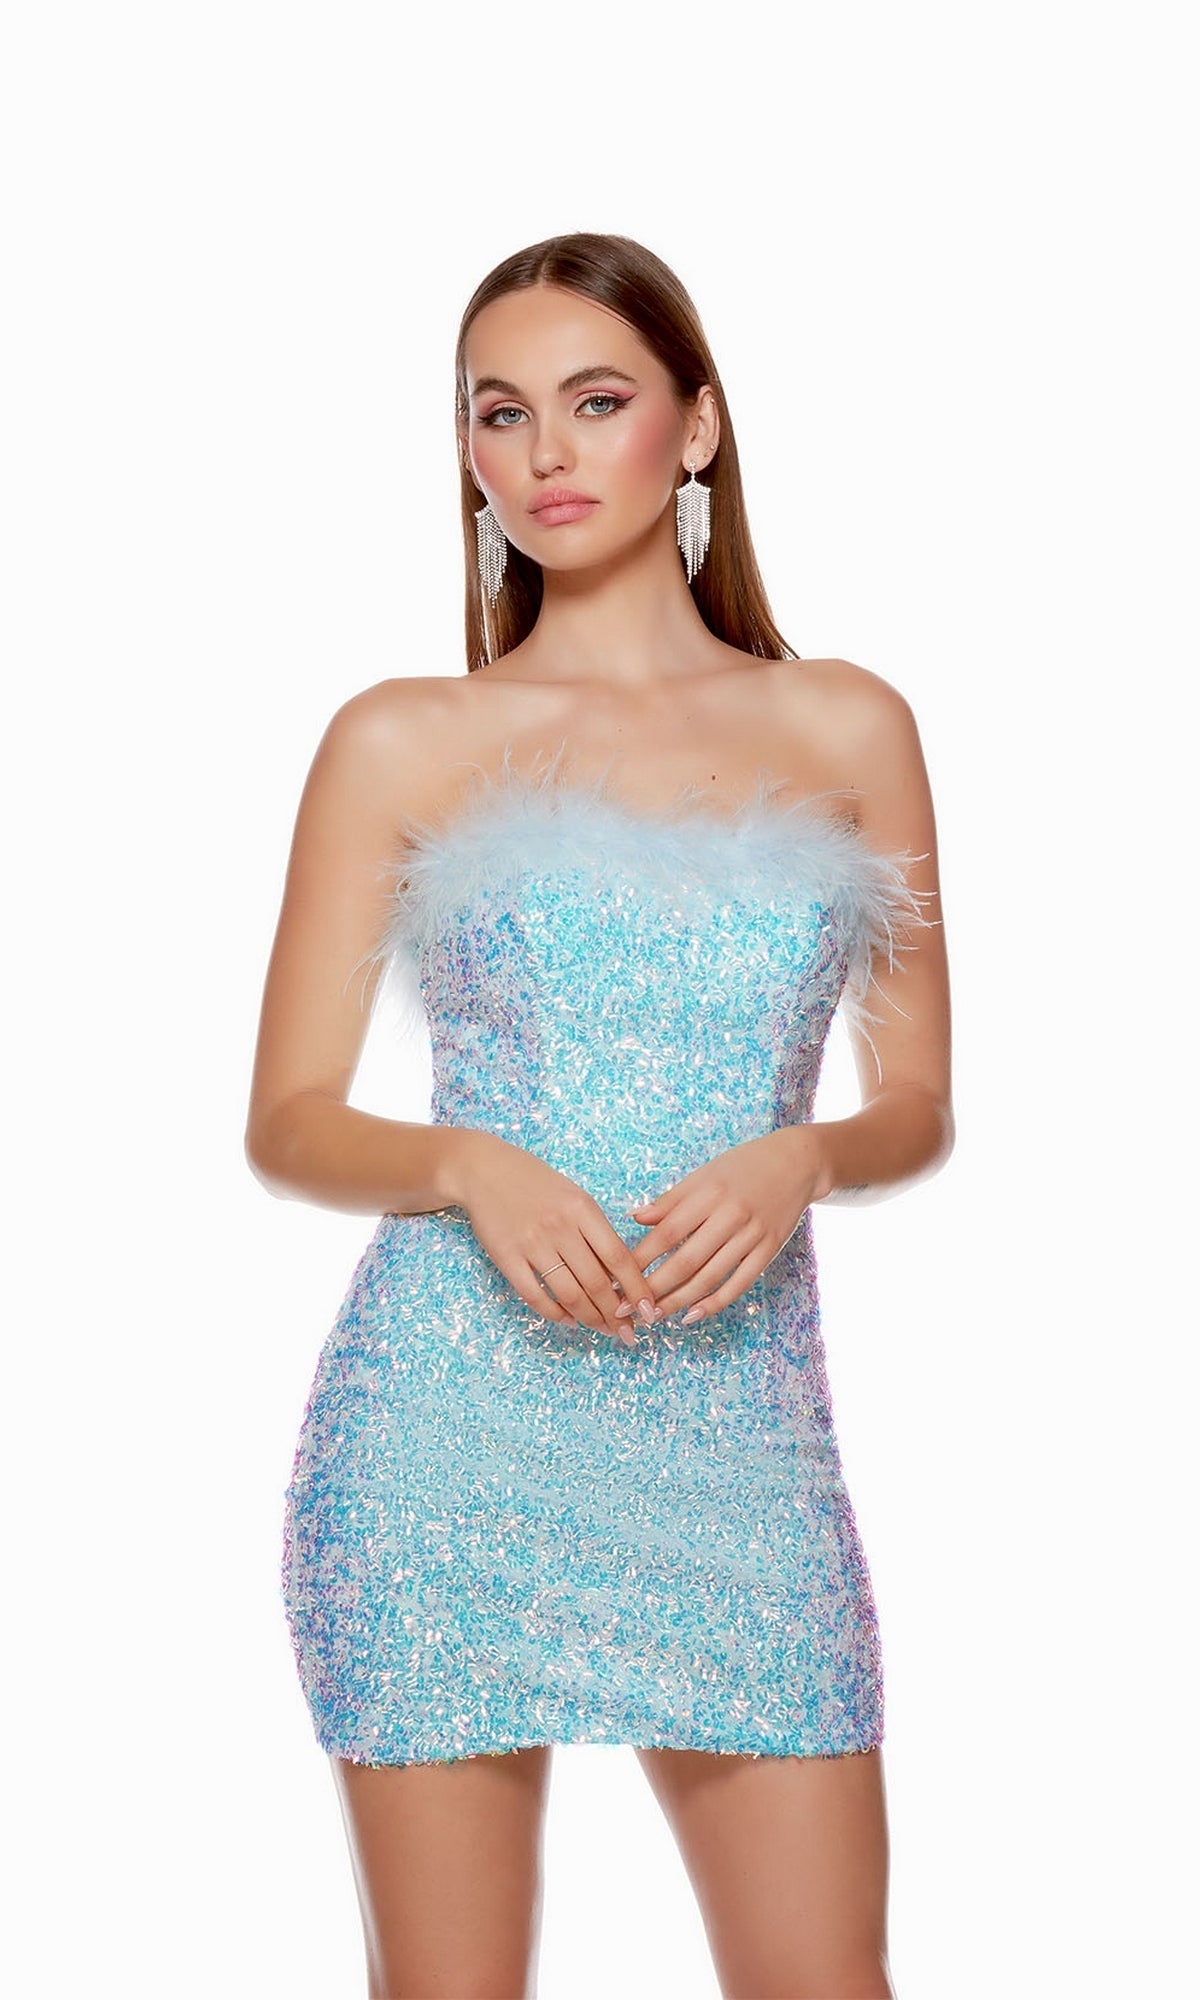 Sky Blue Short Dress By Alyce For Homecoming 4767